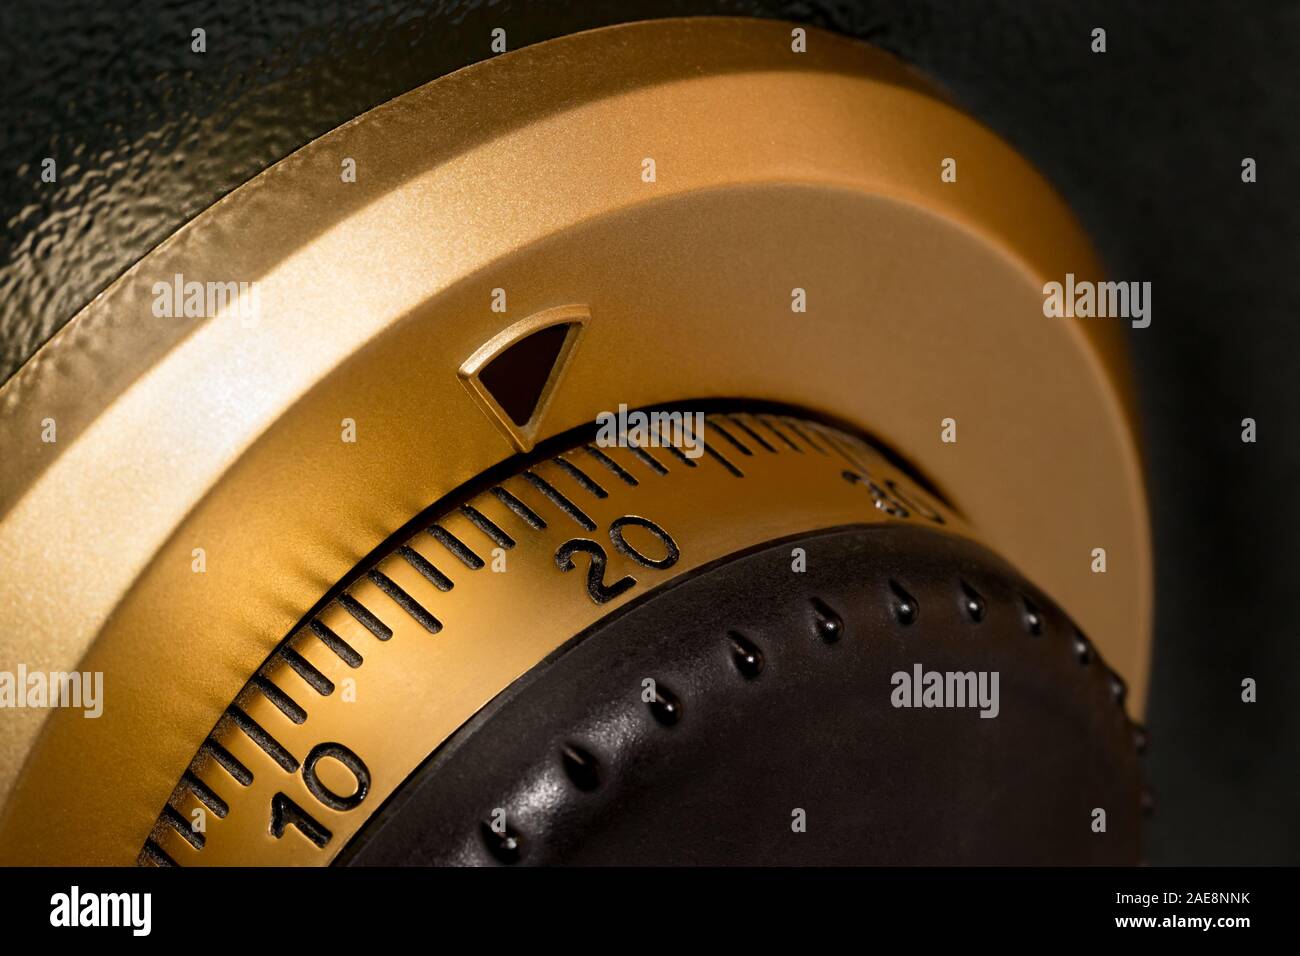 Isolated closeup of safe or vault combination lock with gold dial and black numbers. Concept of strong security and safety Stock Photo